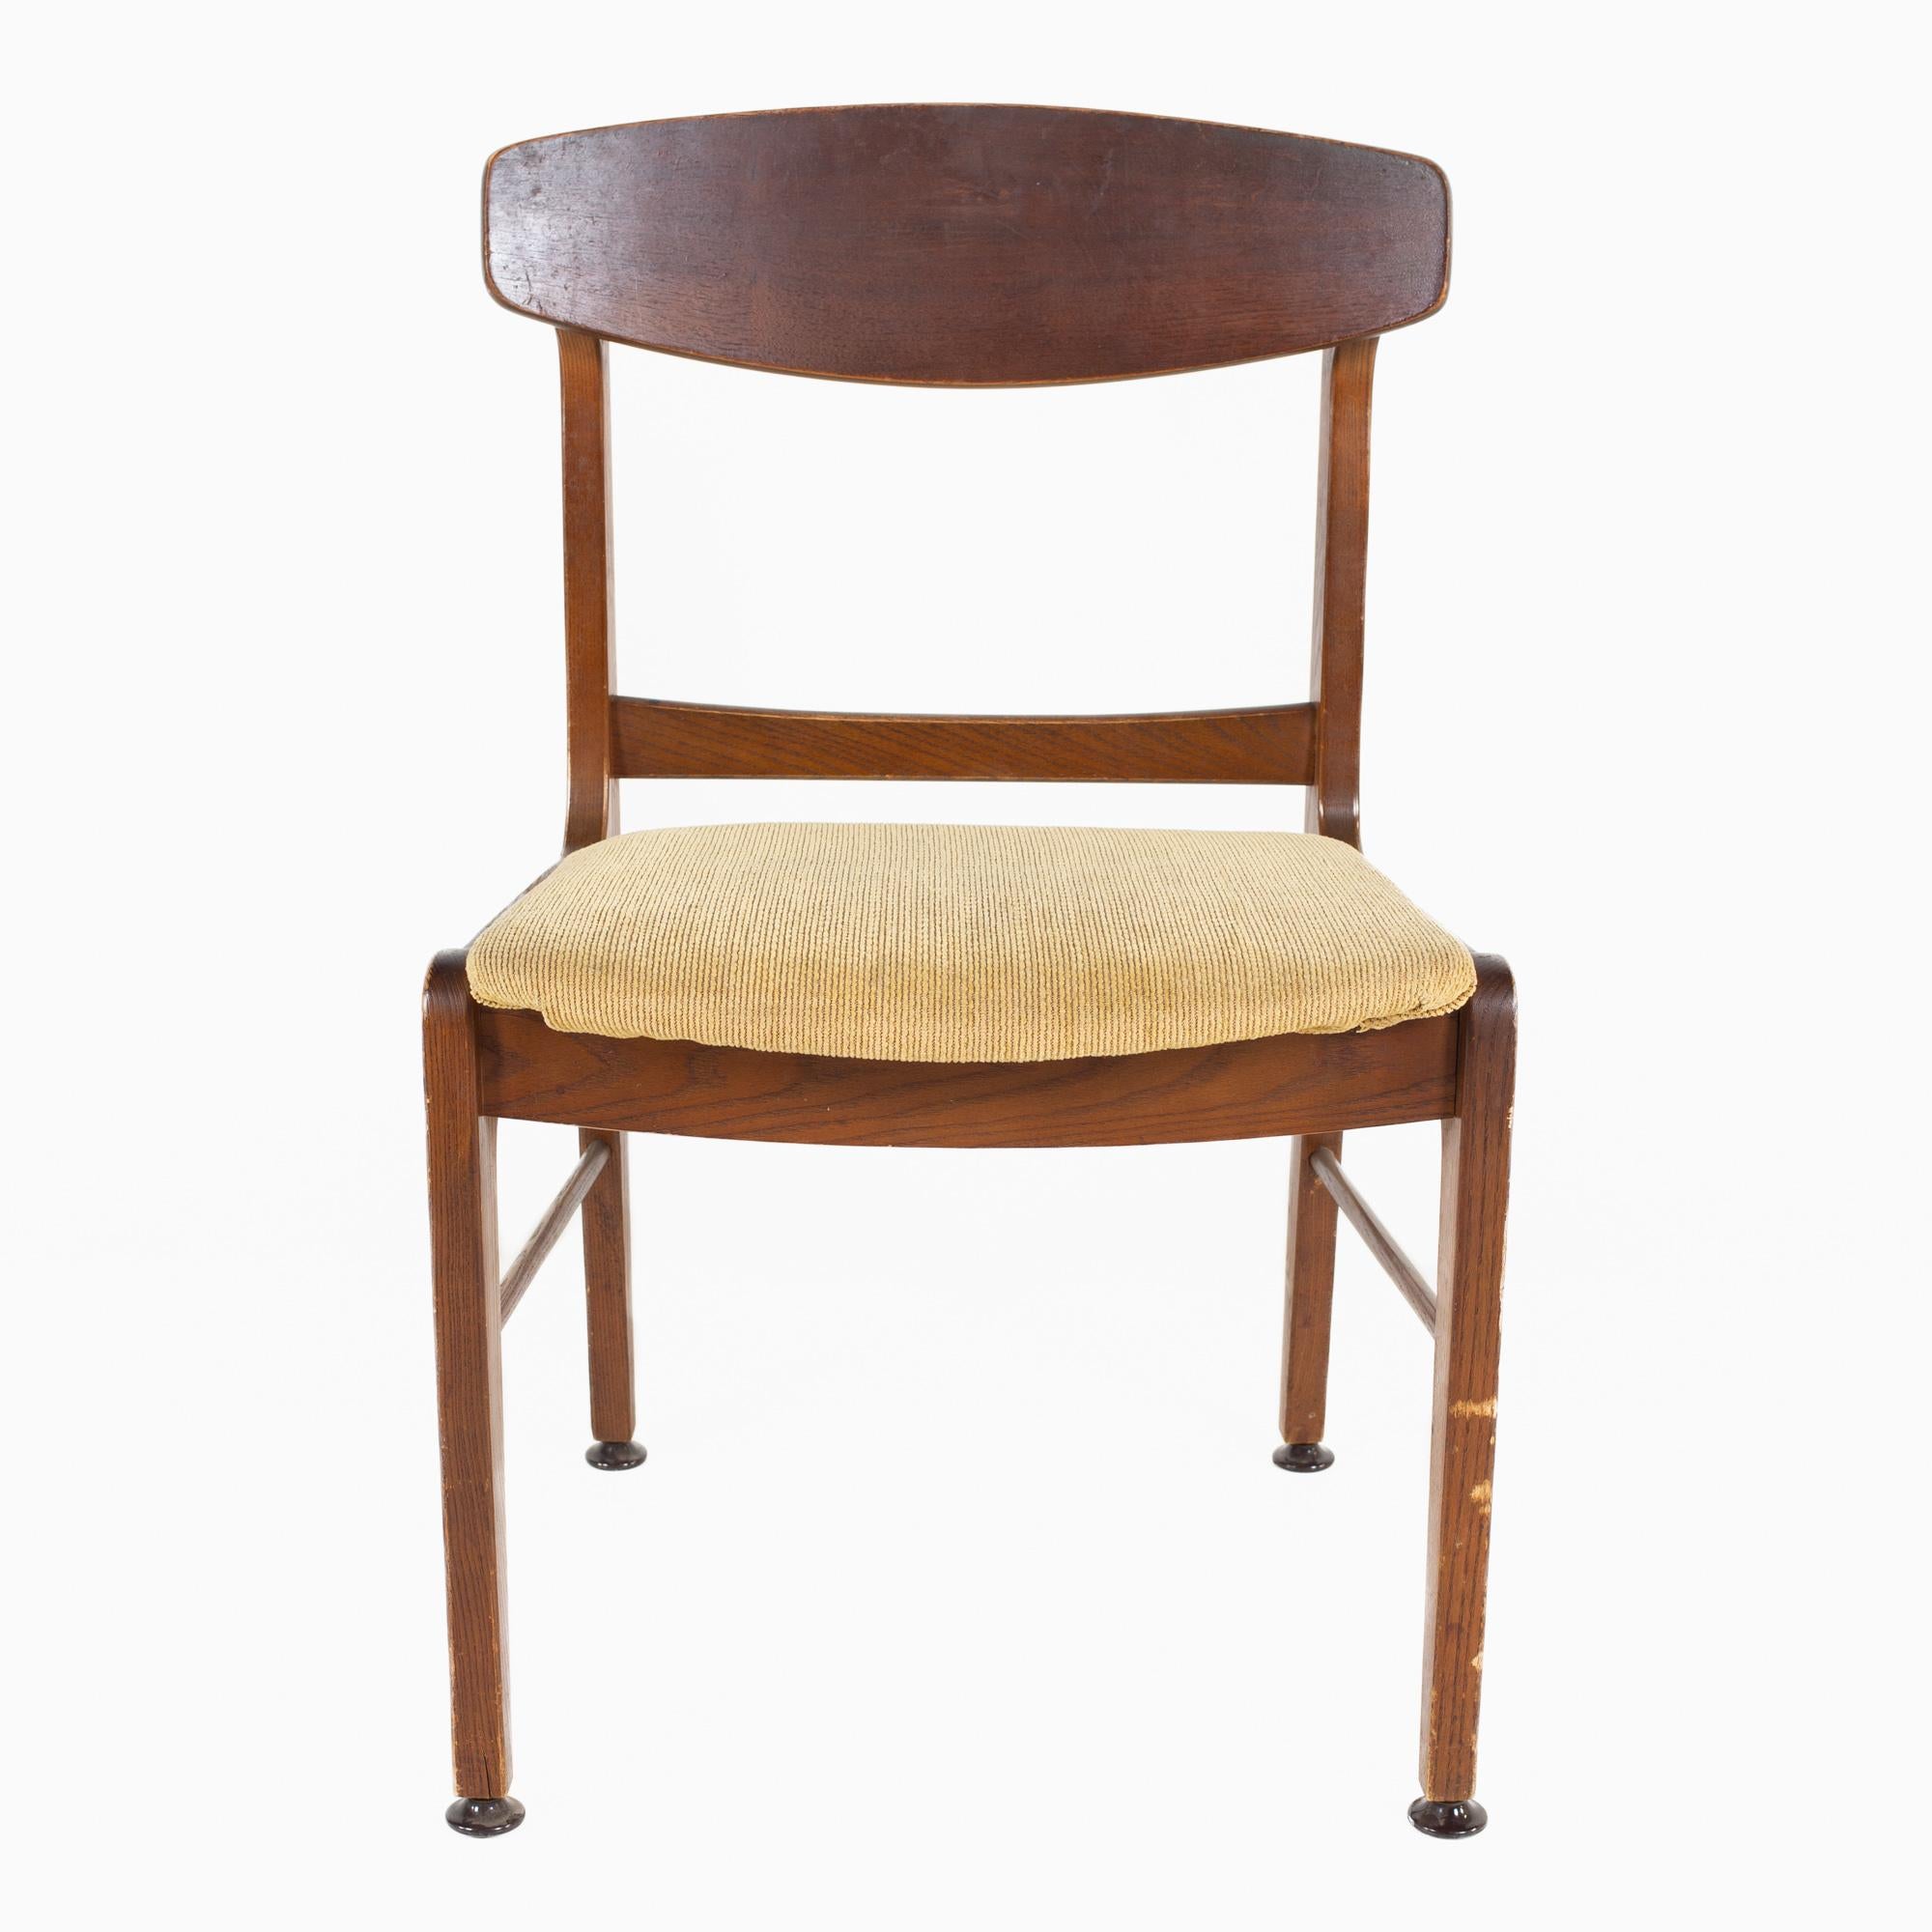 Stanley Walnut Mid Century Dining Side Chair

This chair measures: 20 wide x 19 deep x 33 high, with a seat height of 18 inches

All pieces of furniture can be had in what we call restored vintage condition. That means the piece is restored upon